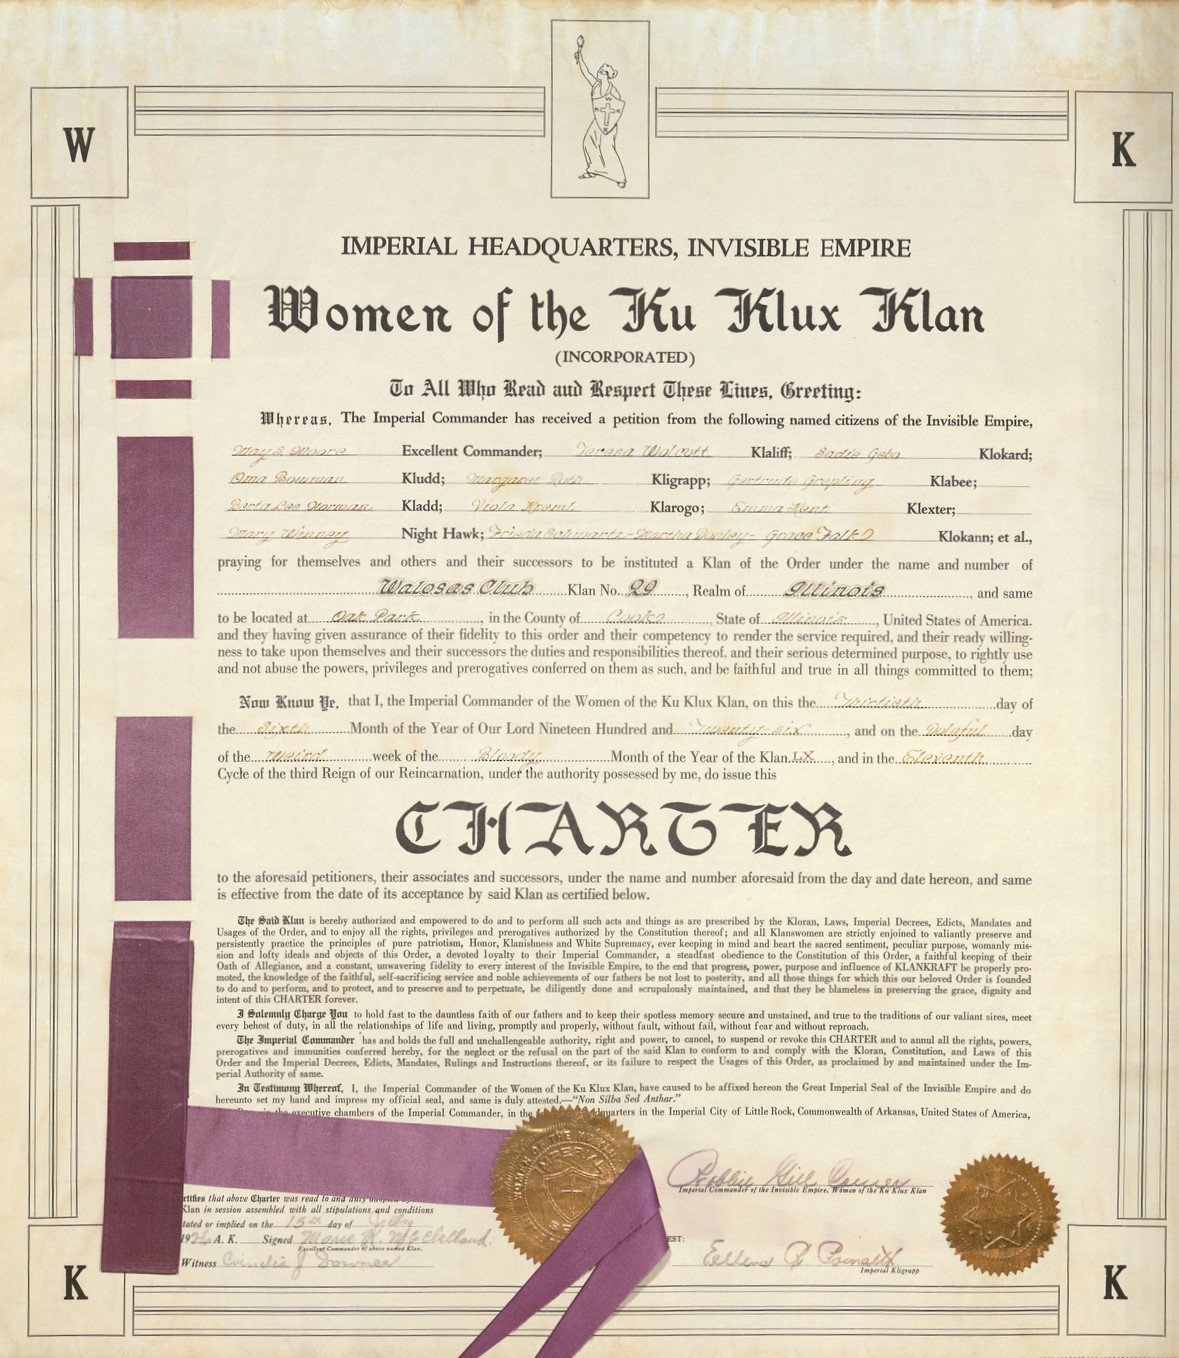 A new chapter of the Women of the Ku Klux Klan was chartered in 1926 in Oak Park, though area Klanswomen had been meeting since 1924. This autonomous organization grew out of the rebirth of the KKK but was self-governing and not under the auspices of the men's KKK. Note the innocuous name the Walosas Club on the 1926 charter, further cloaking the secret society in the shadows.